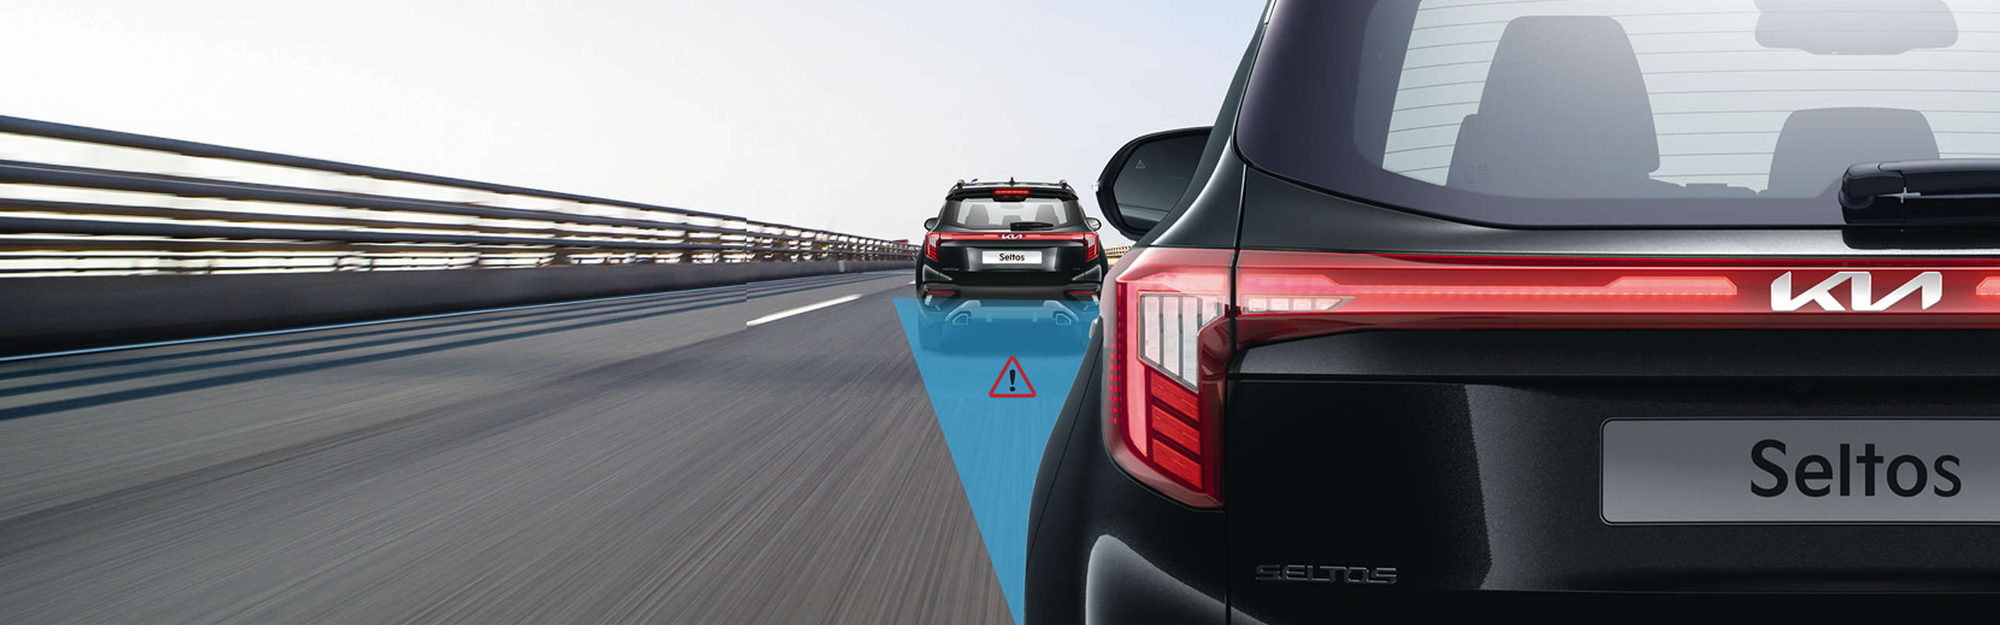 Front Collision Warning and Avoidance Assist (FCW and FCA)